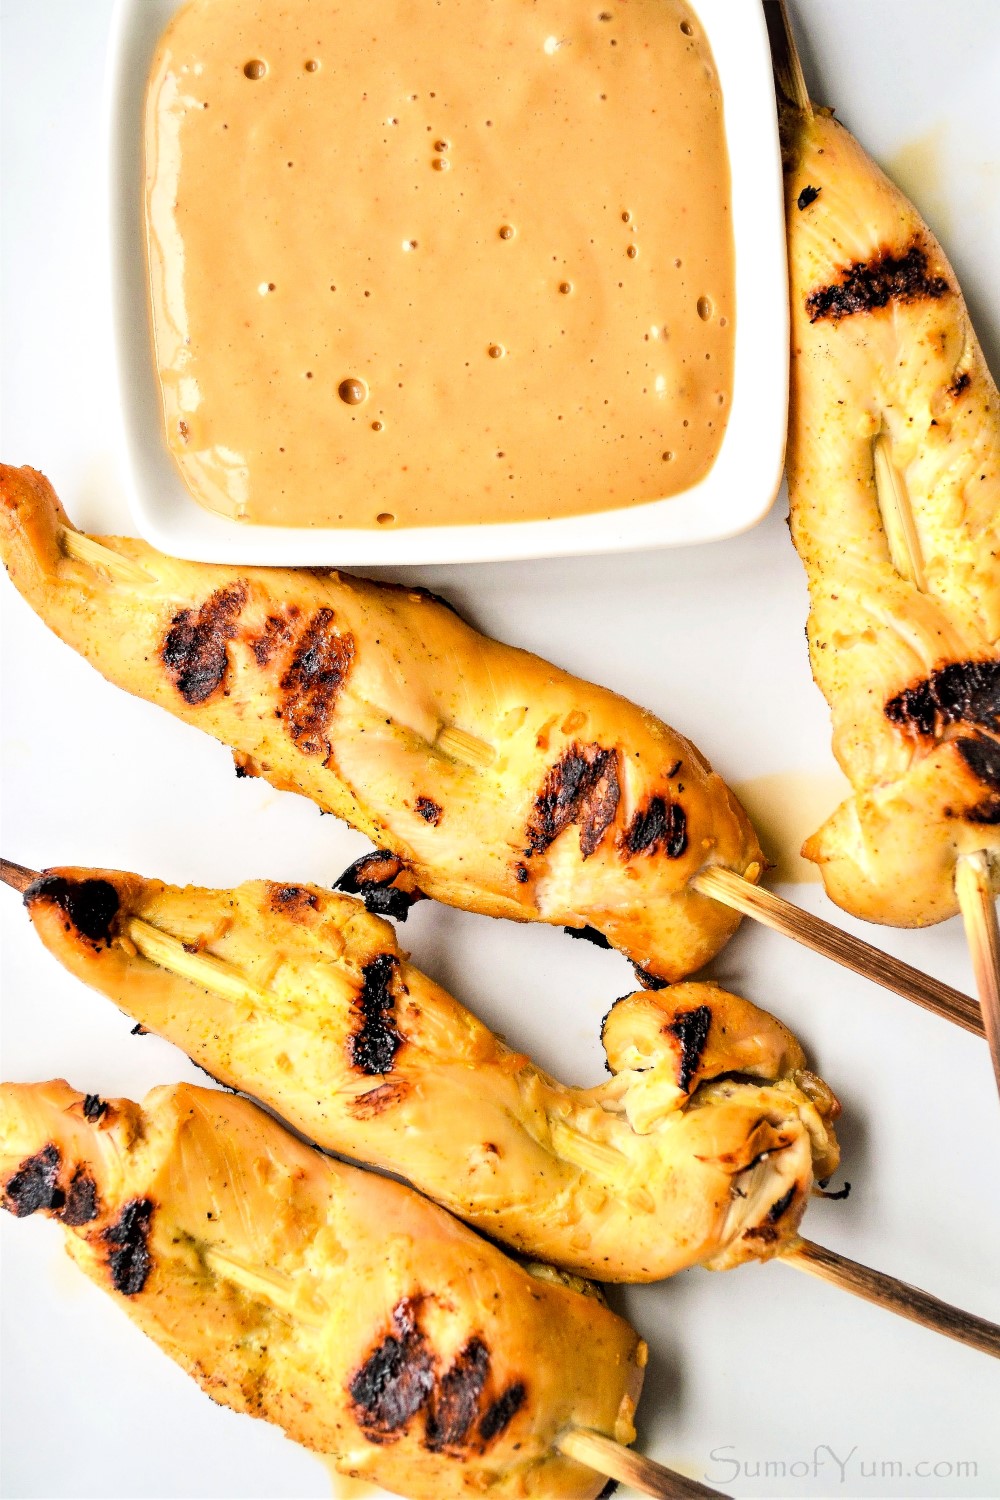 Grilled Chicken Satay Skewers with Peanut Dipping Sauce